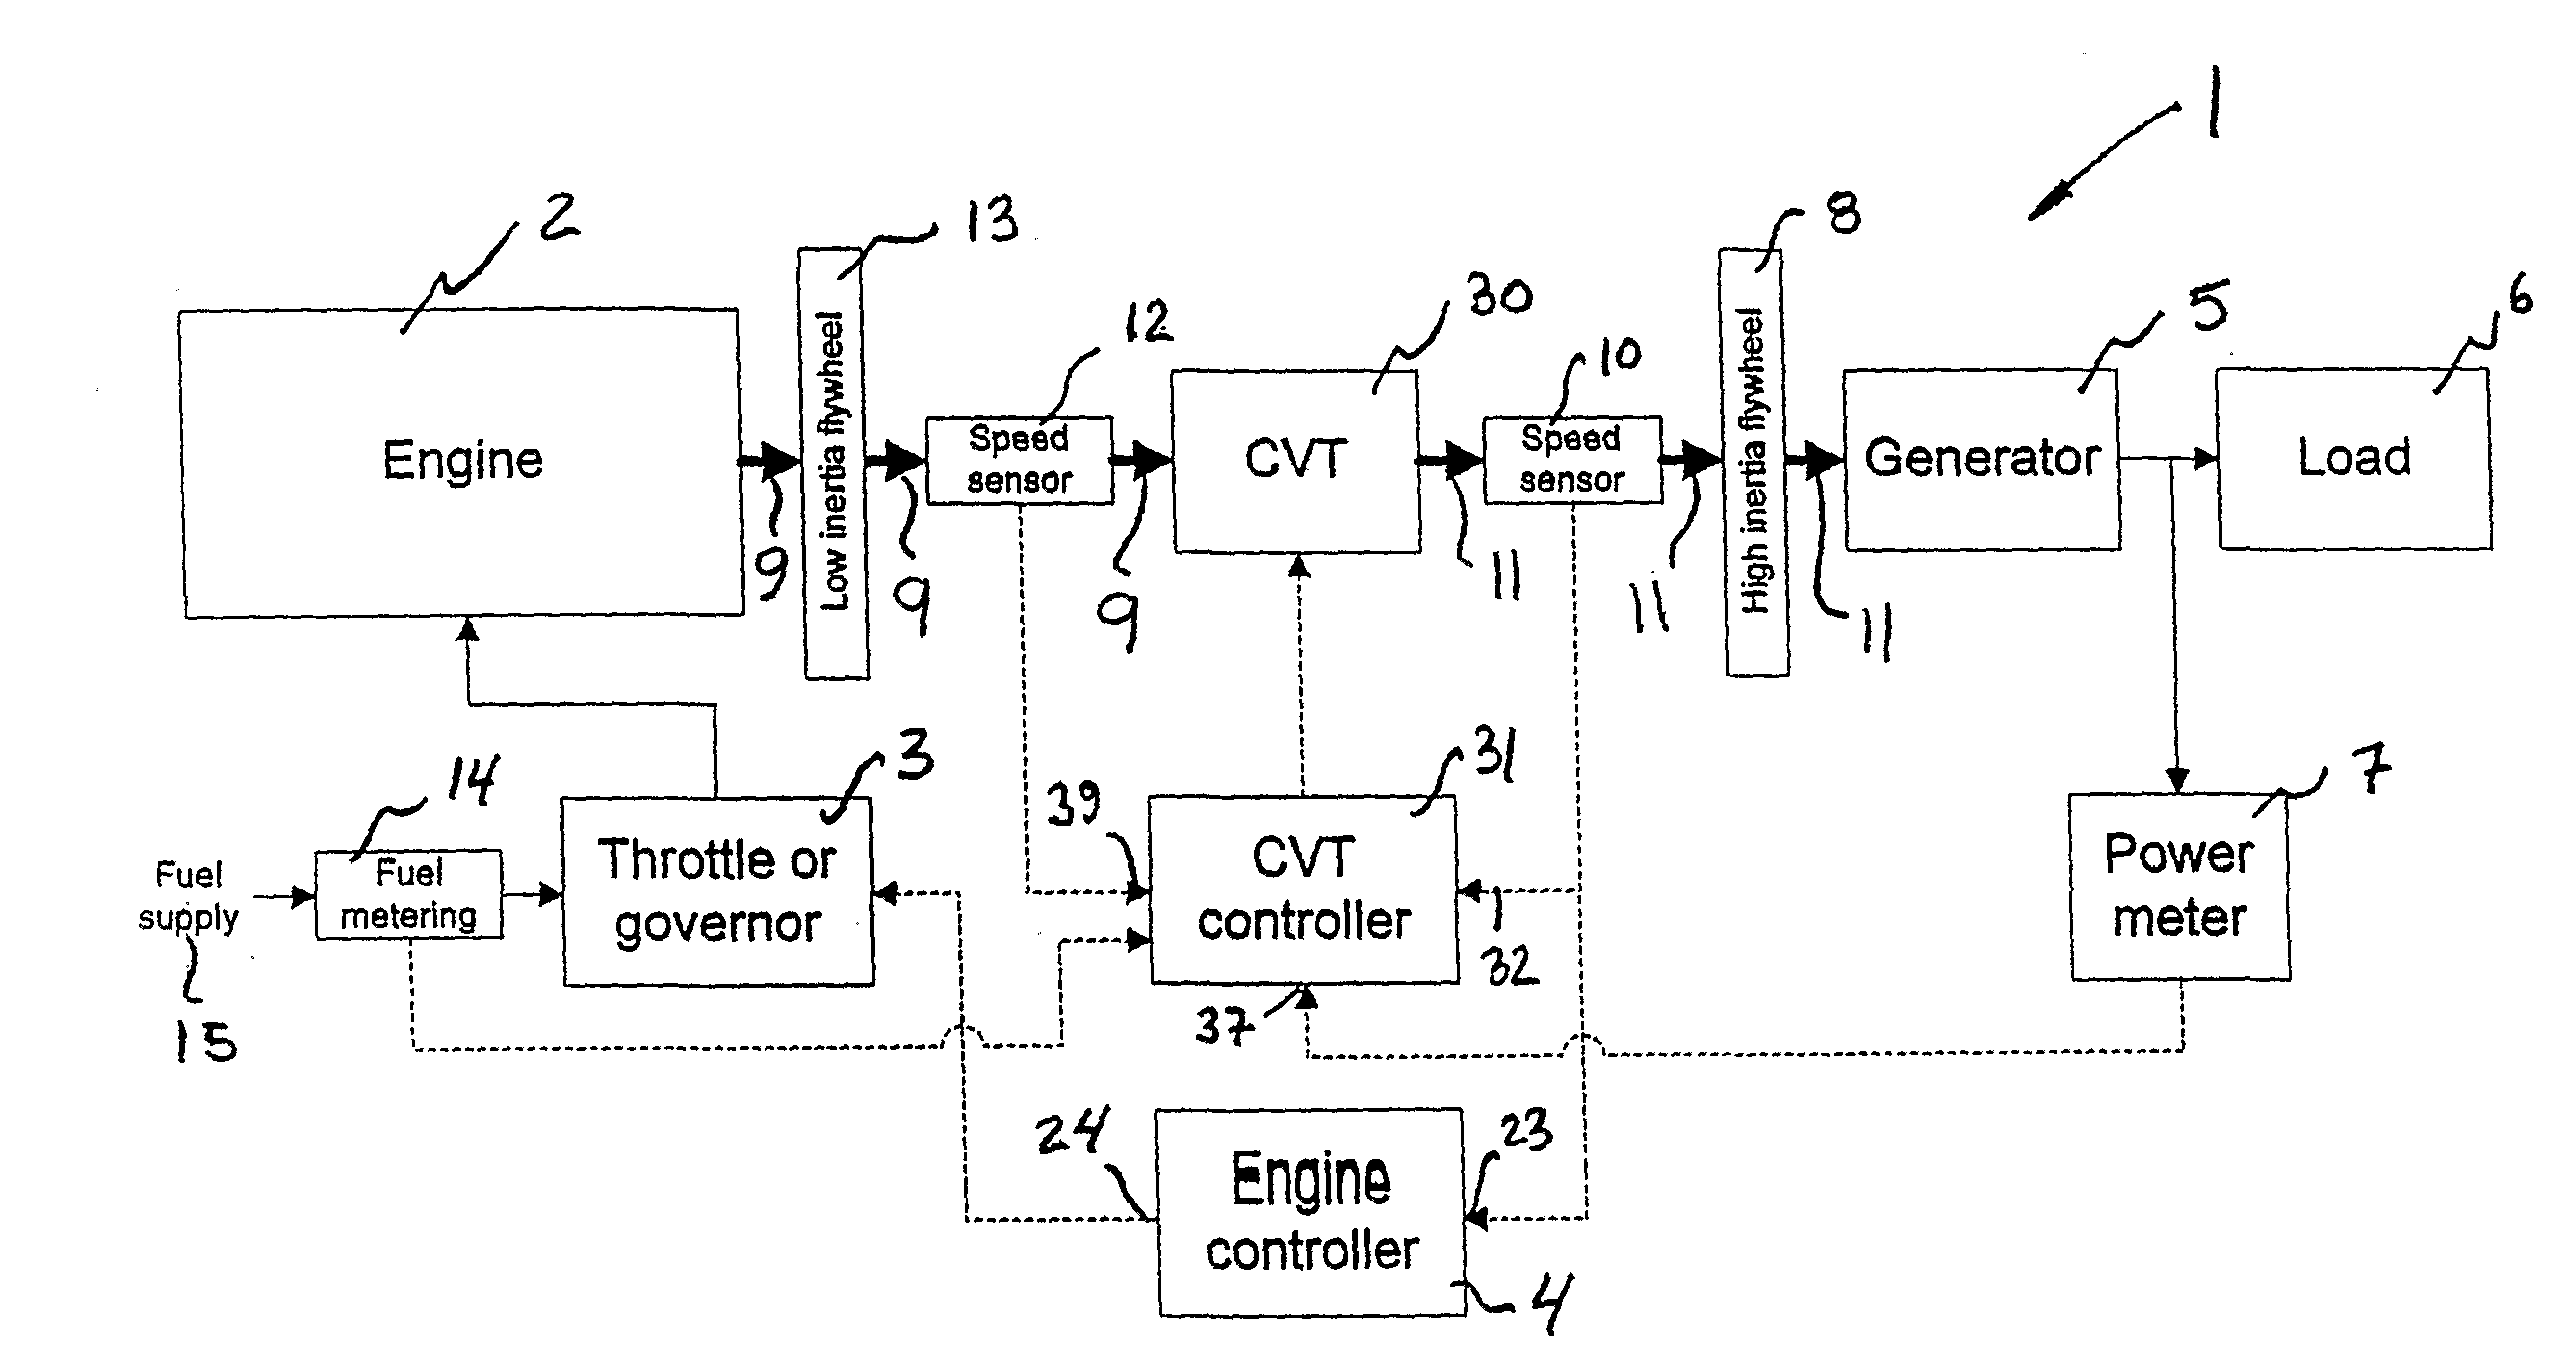 Steady-state and transitory control for transmission between engine and electrical power generator